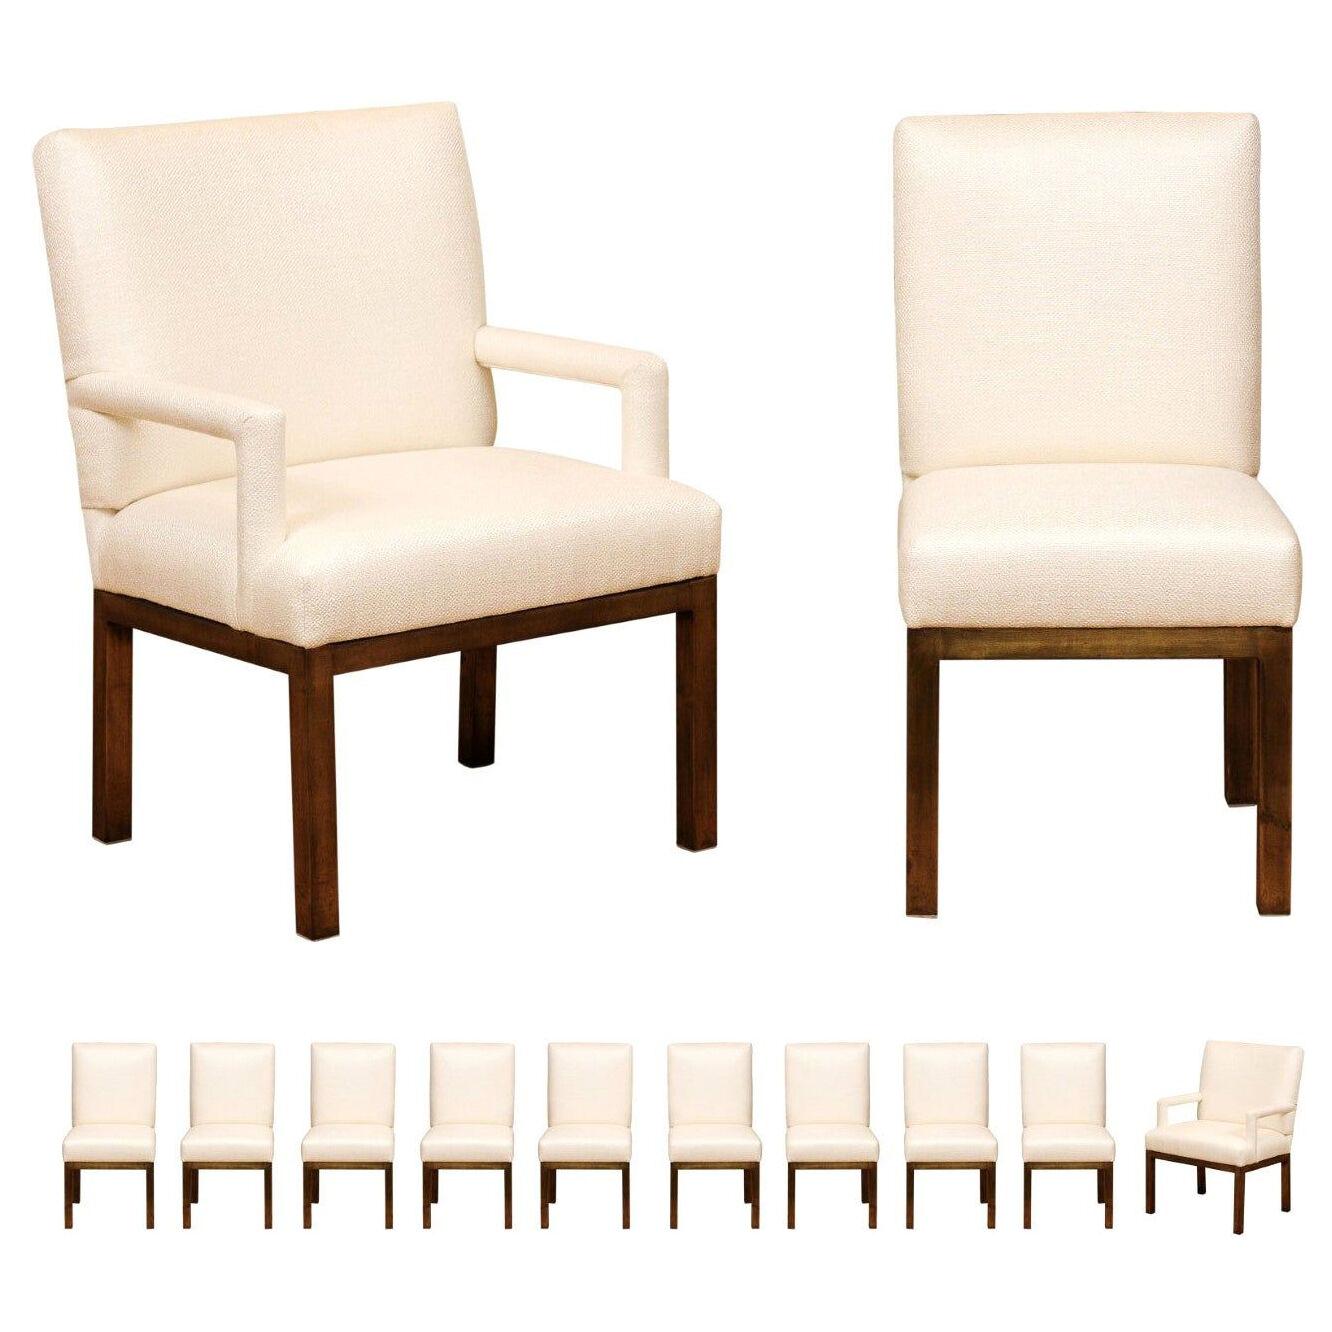 Chic Restored Set of 12 Brass Parsons Dining Chairs by John Stuart, circa 1968